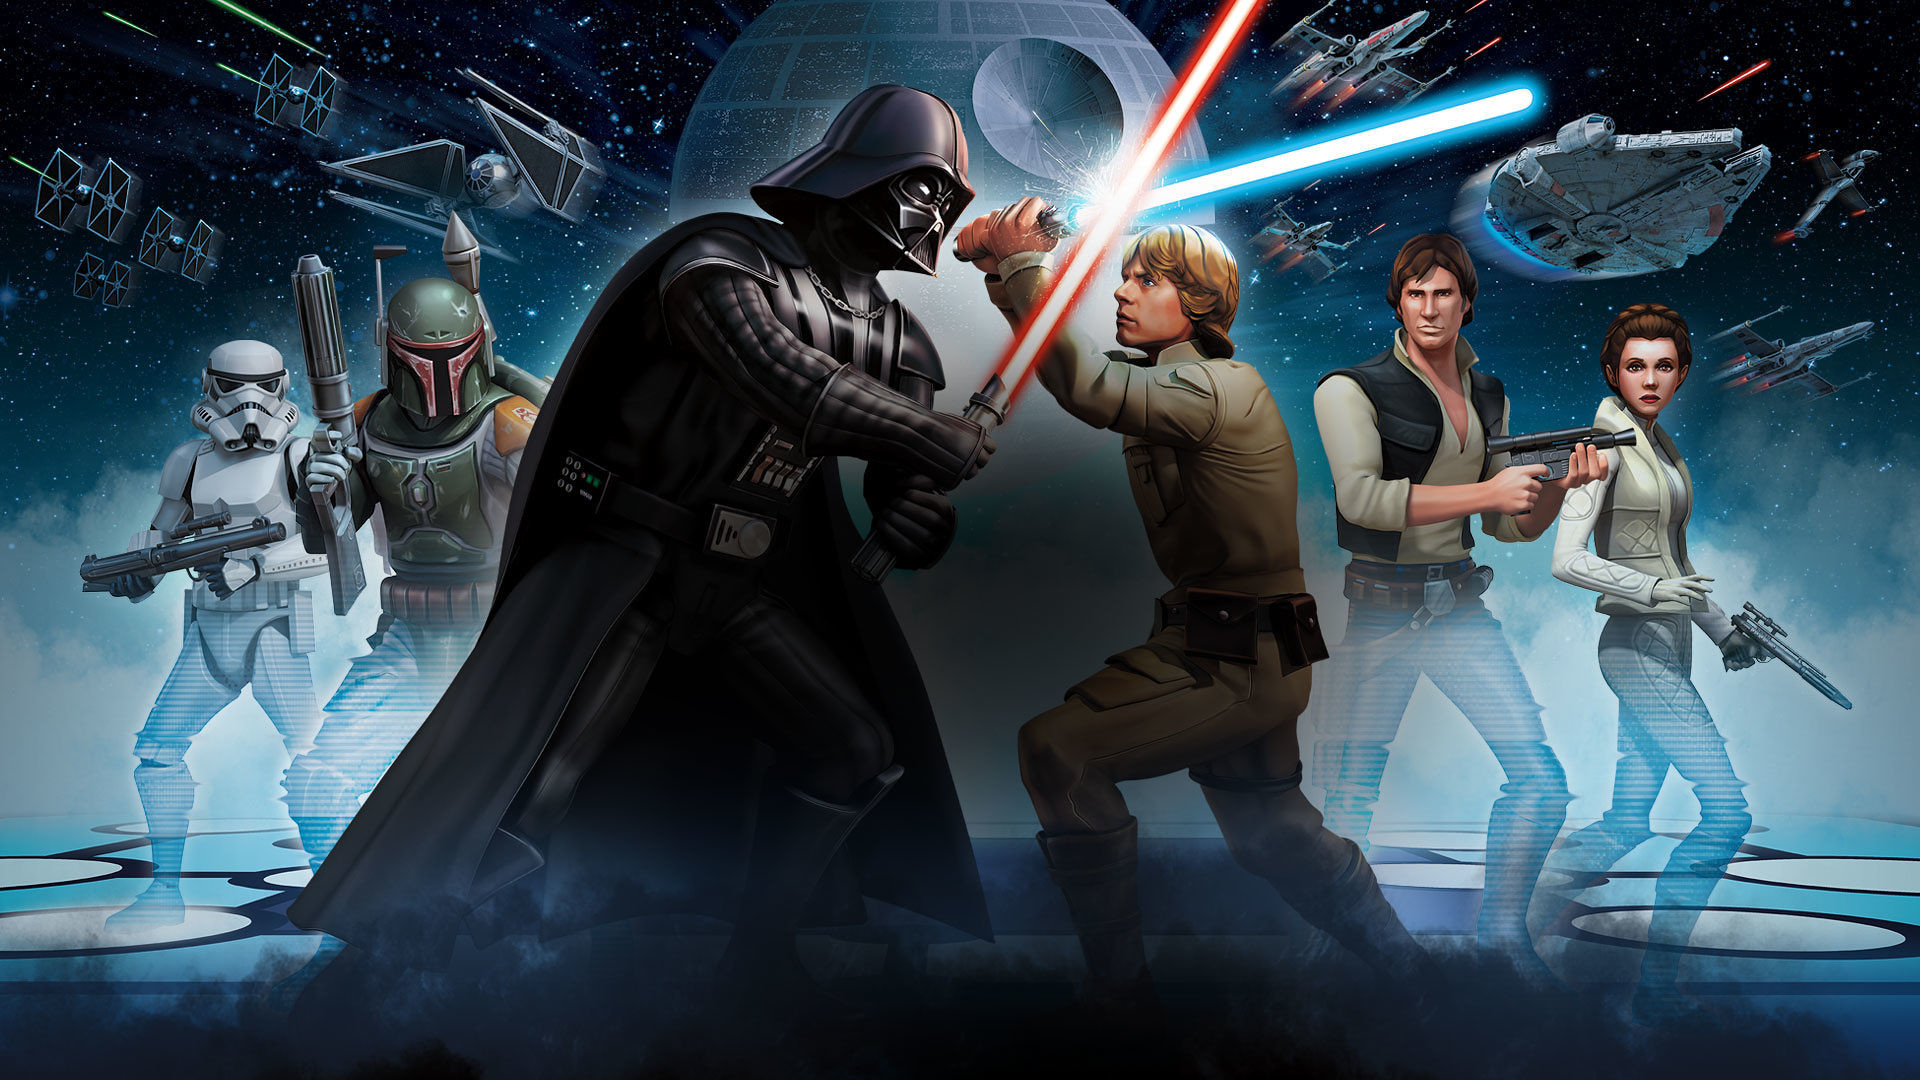 1920x1080 Star Wars Galaxy of Heroes gets Androidexclusive content ahead